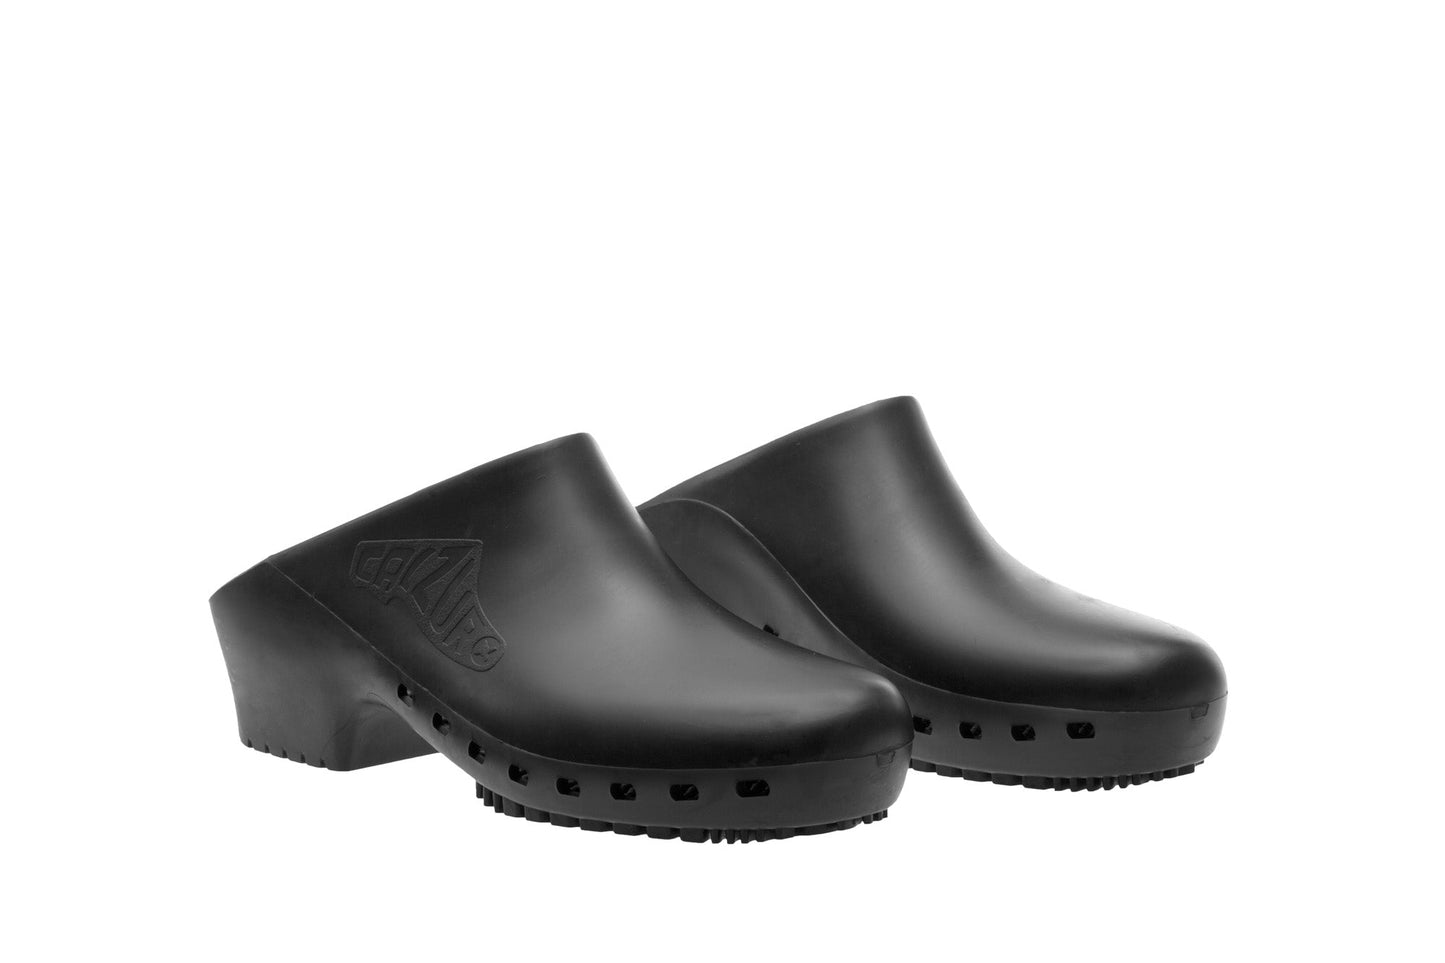 Calzuro Classic clogs without Upper Holes - Black